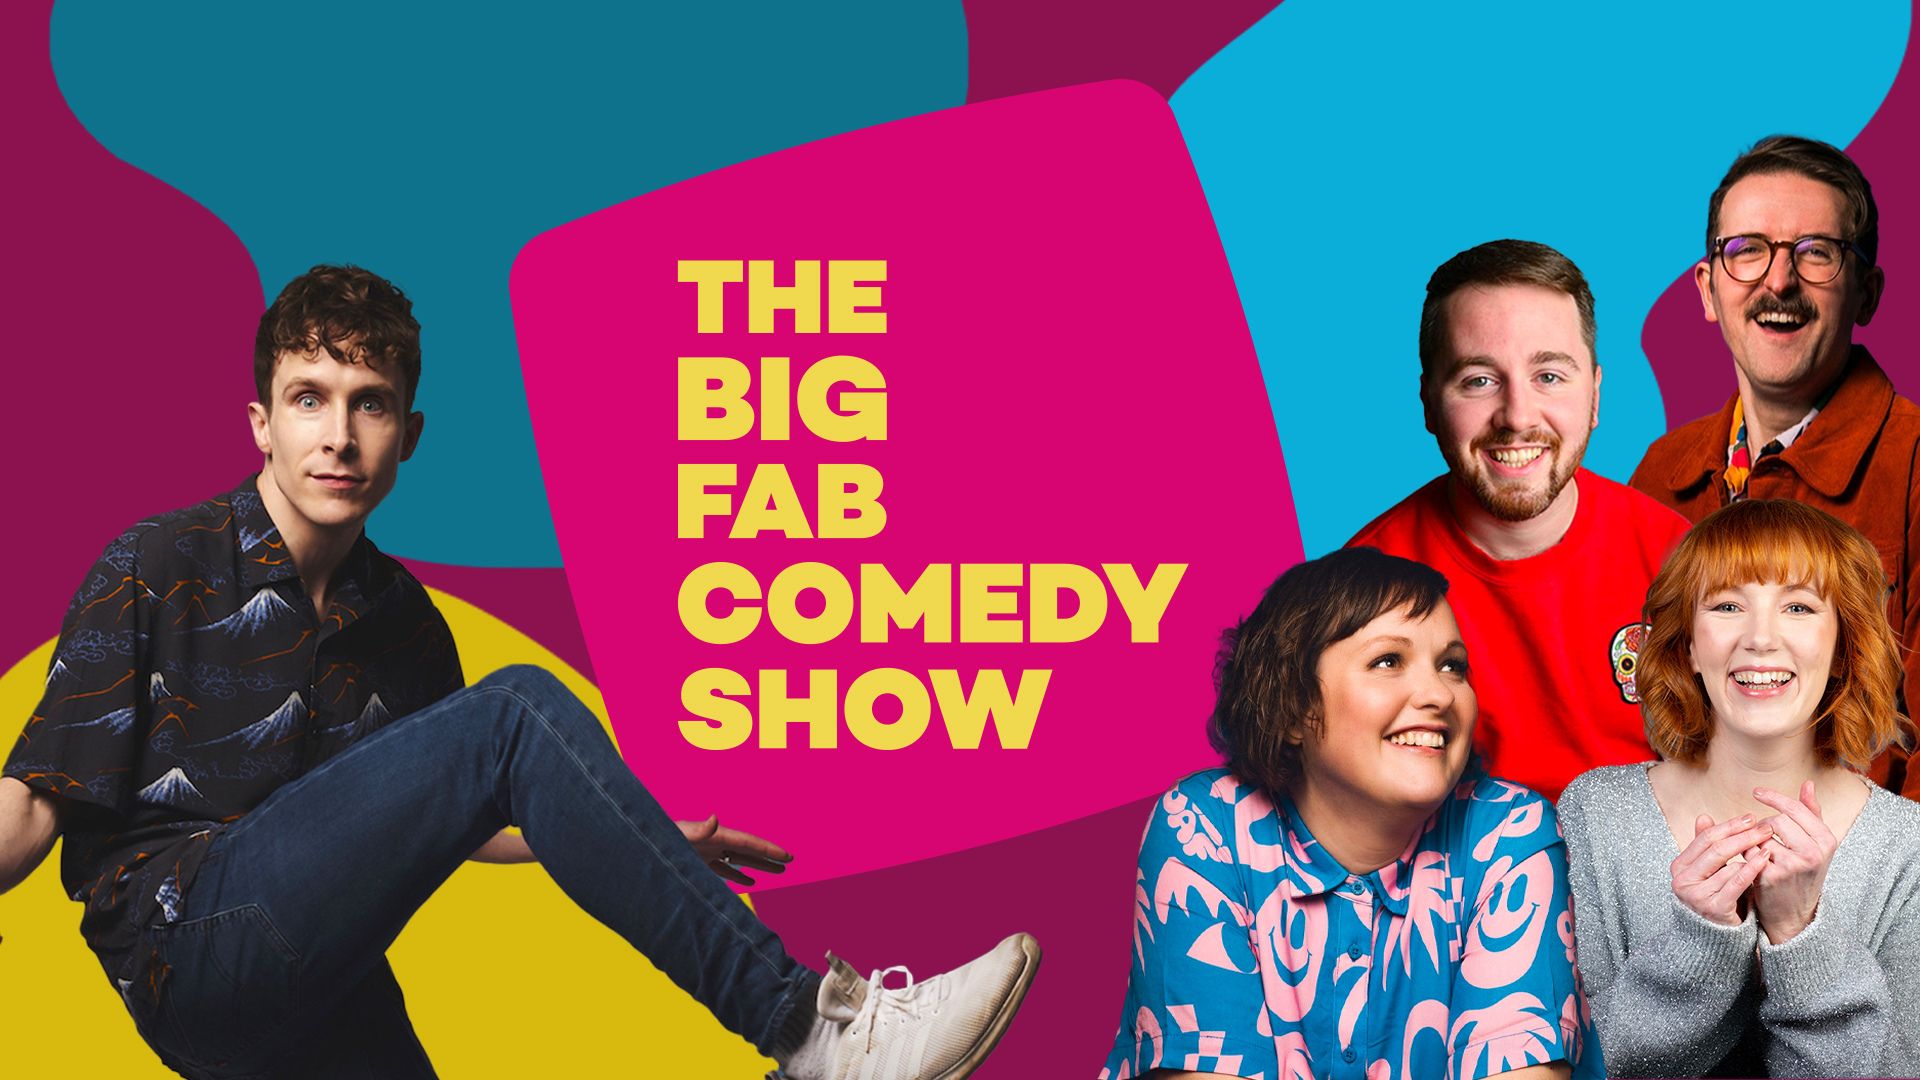 A colourful background with the comedians - three white men and two white women superimposed in various positions. Text in yellow on a pink square reads The BIG FAB COMEDY SHOW